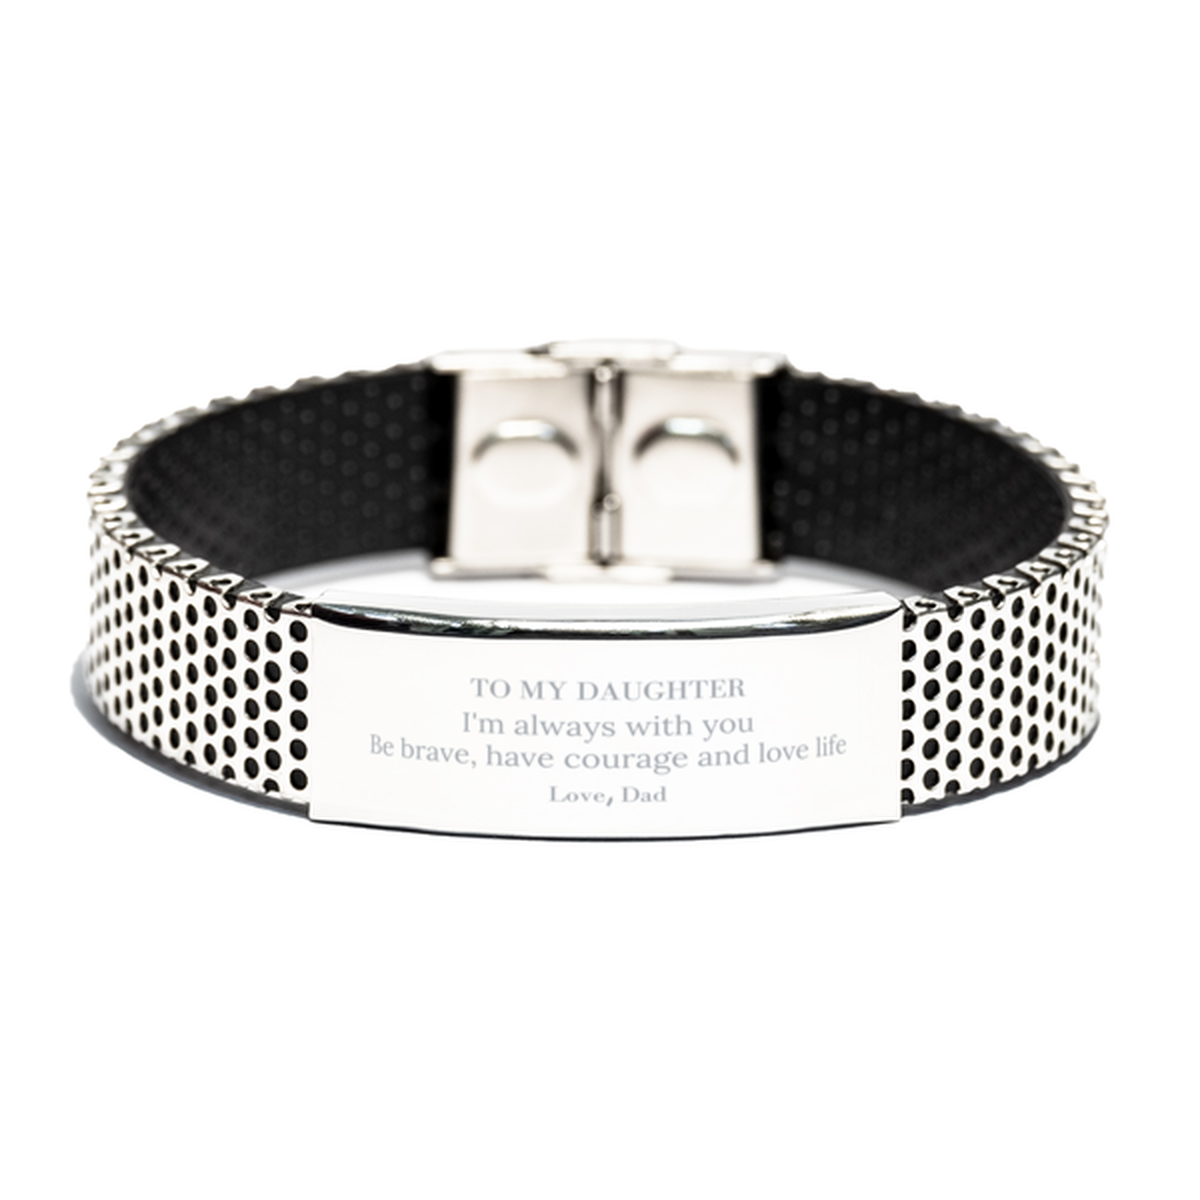 To My Daughter Gifts from Dad, Unique Stainless Steel Bracelet Inspirational Christmas Birthday Graduation Gifts for Daughter I'm always with you. Be brave, have courage and love life. Love, Dad